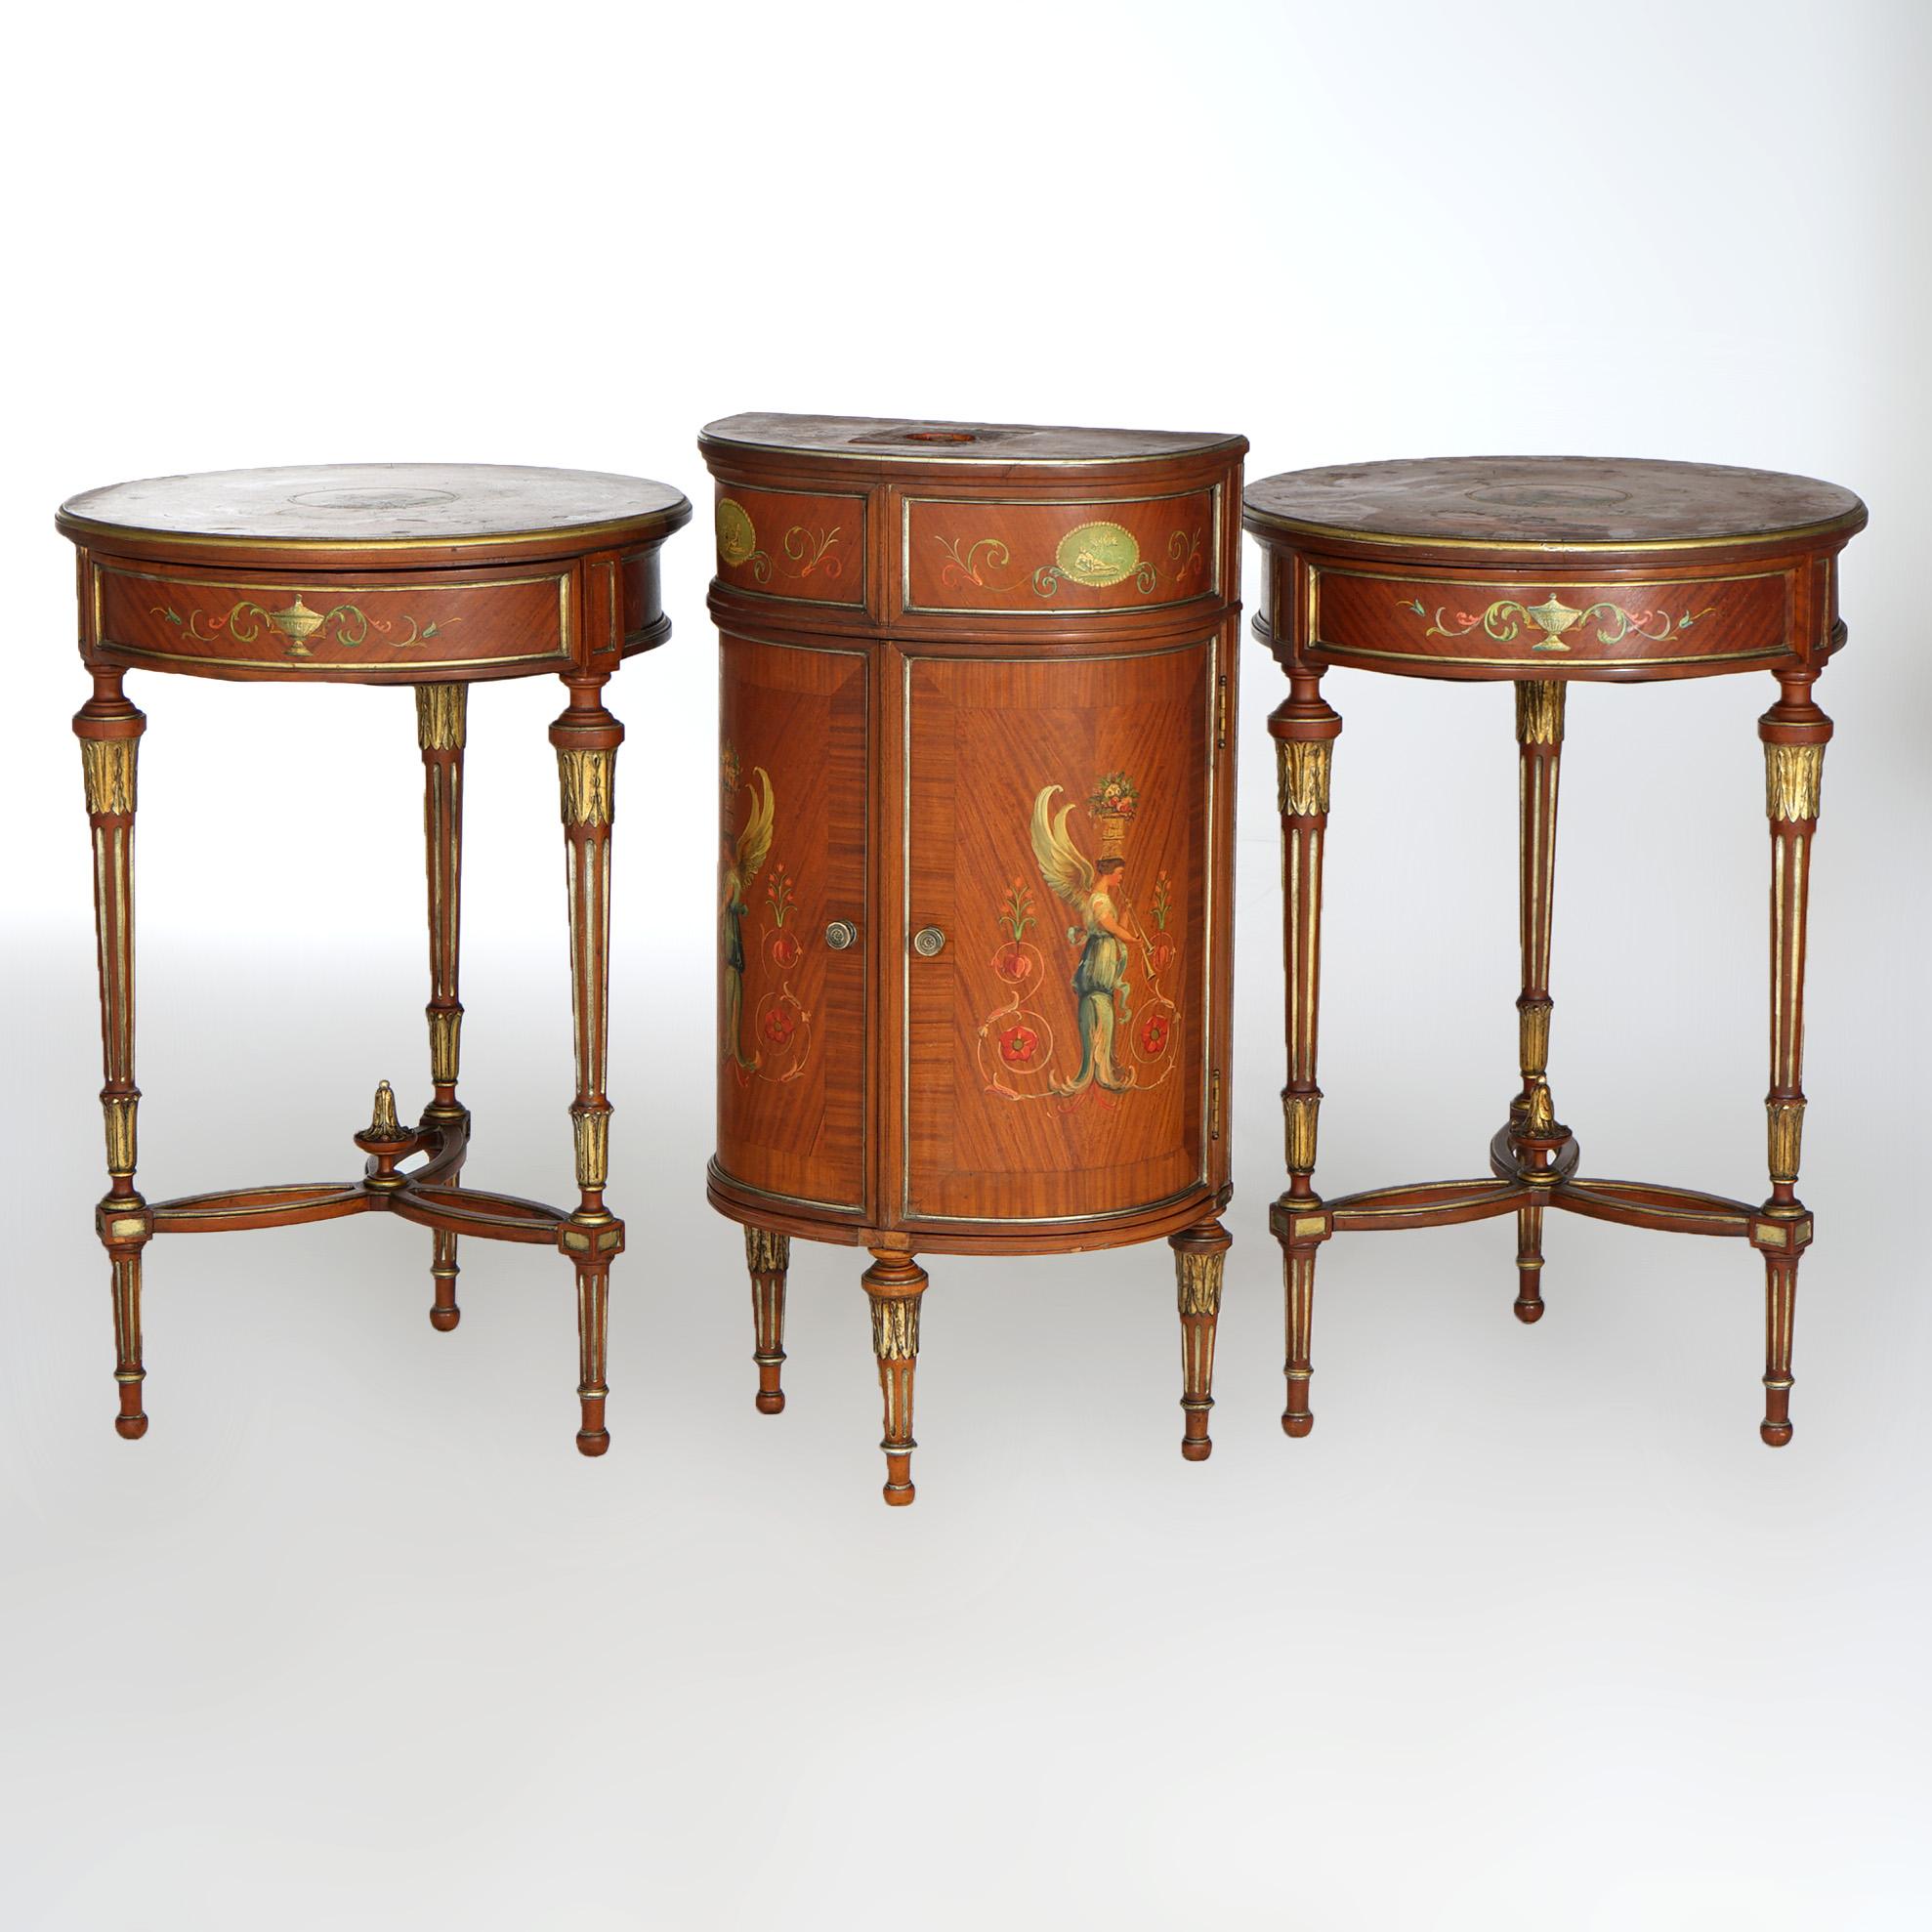 20th Century Antique Set English Parcel Gilt & Adams Decorated Satinwood Stands c1900 For Sale